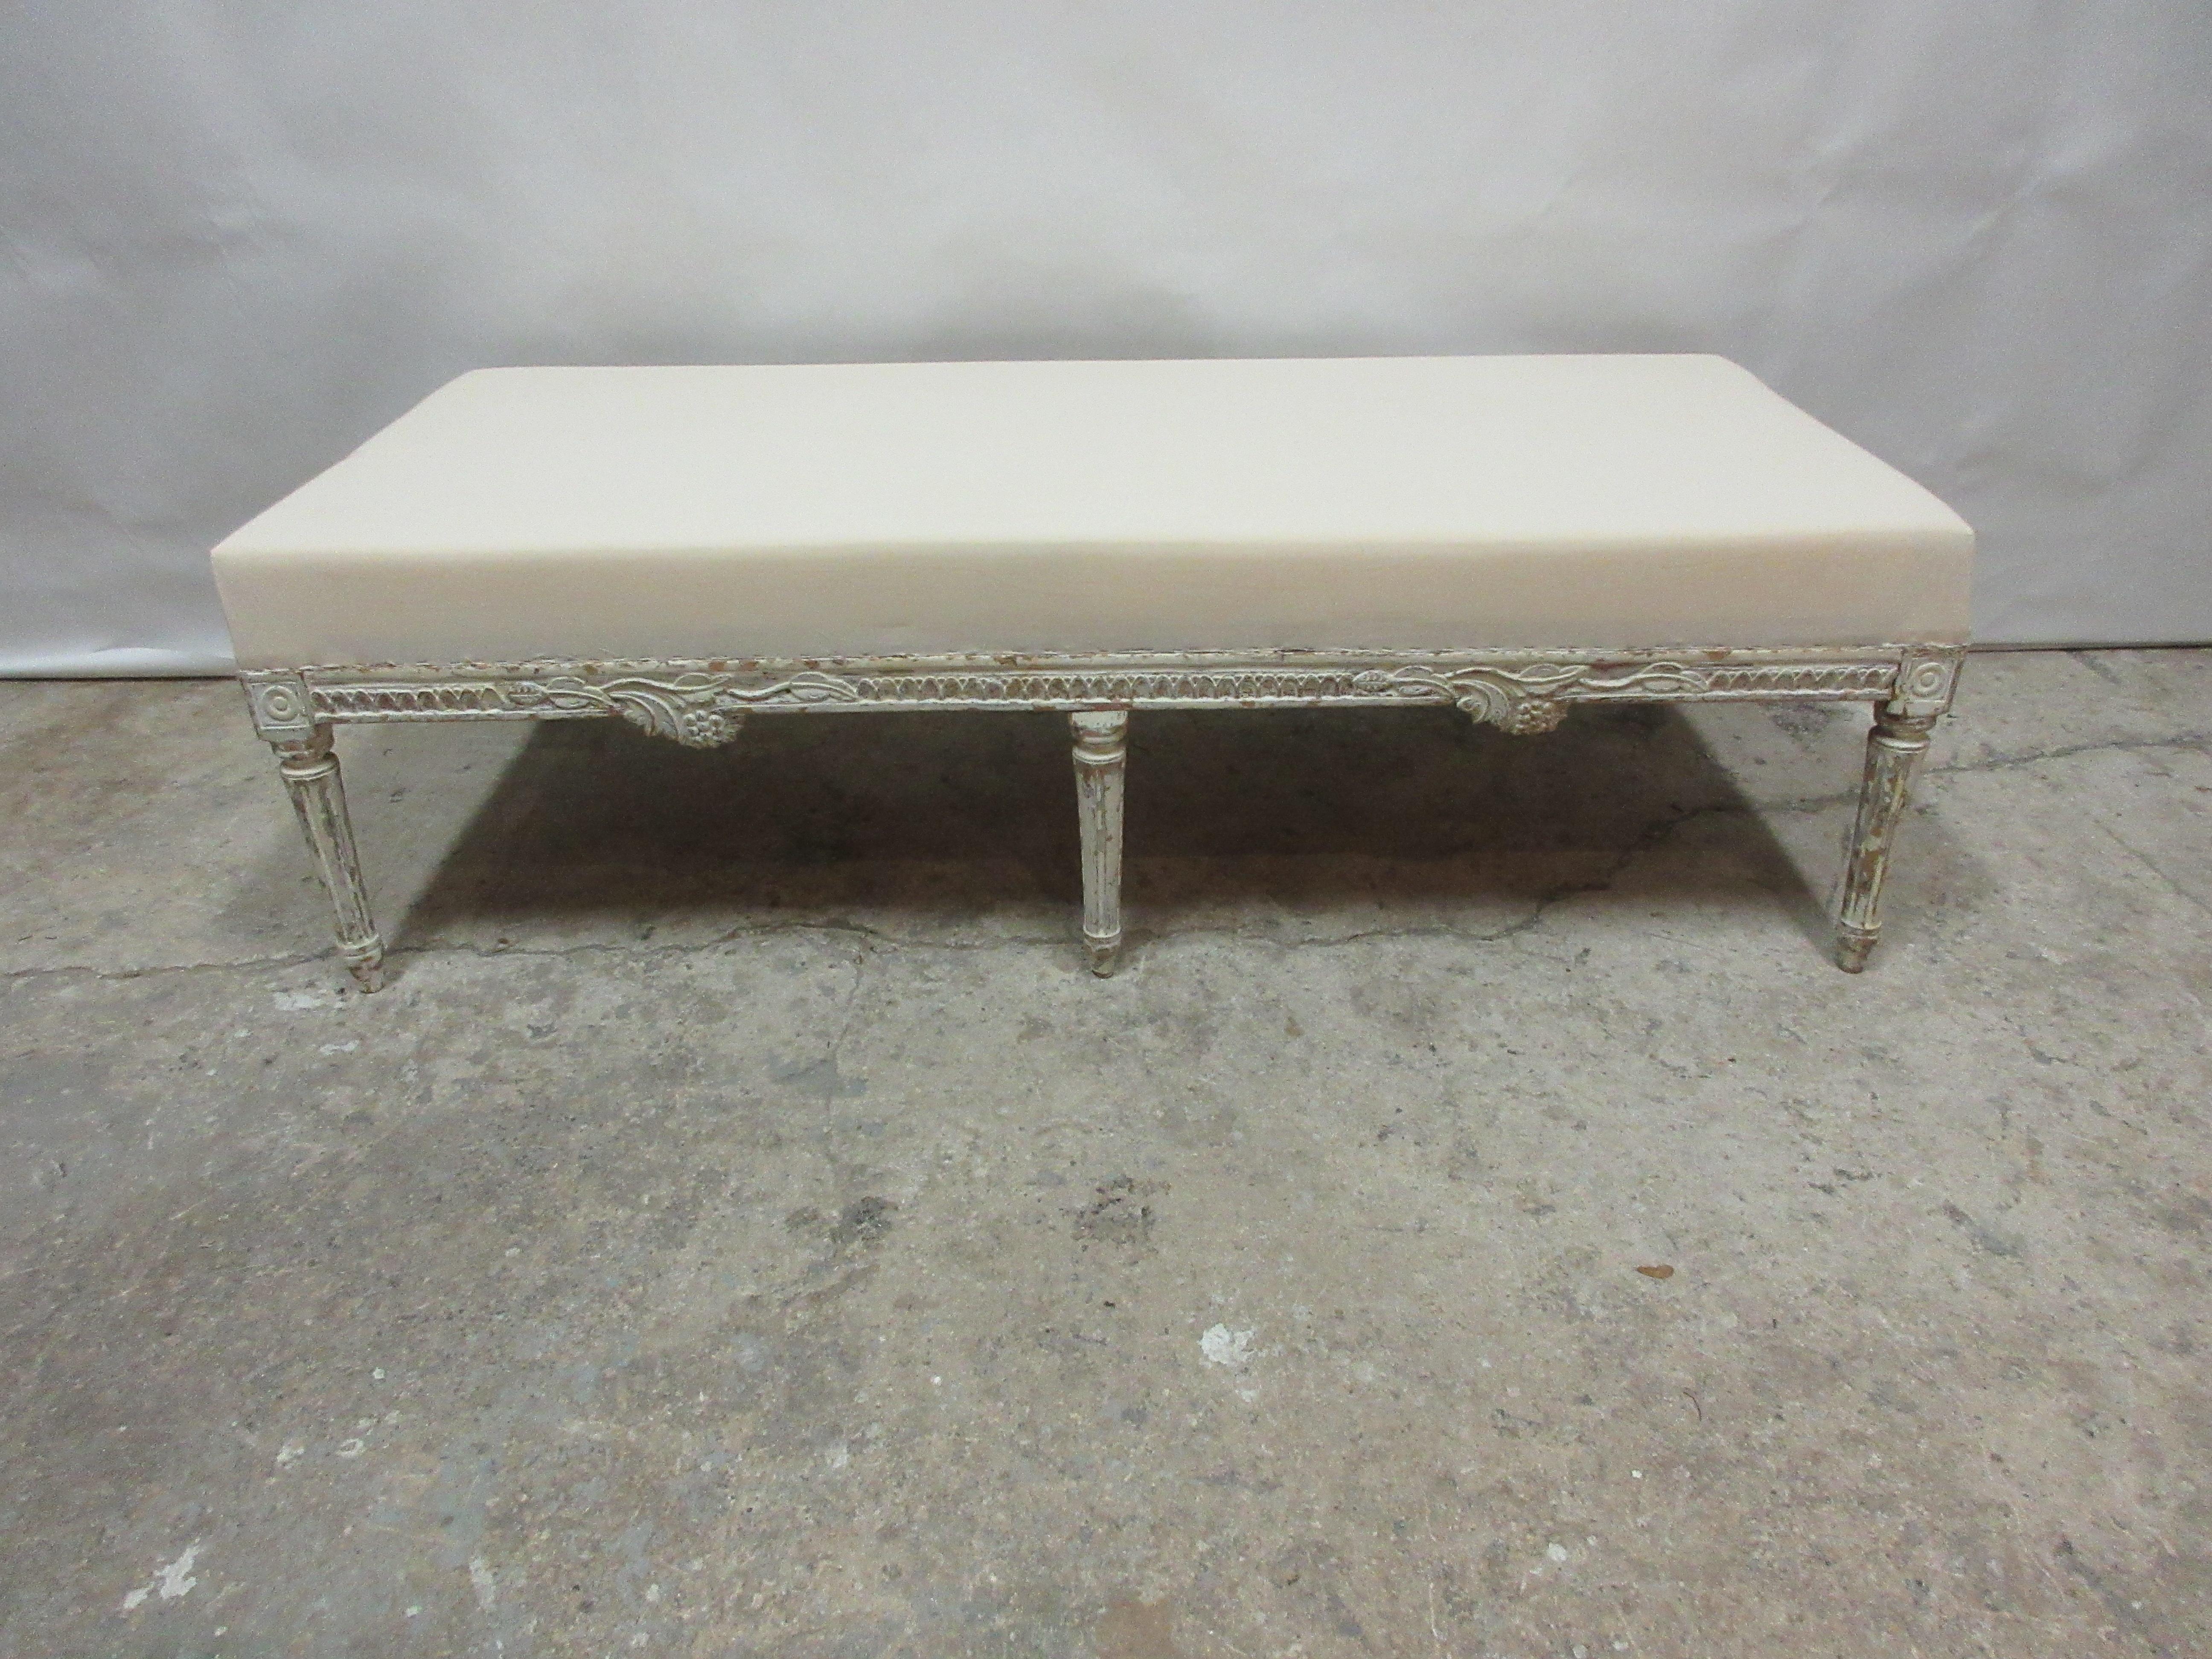 This is a 100% original Swedish Gustavian bench. the seating has been restored and covered in Muslin.